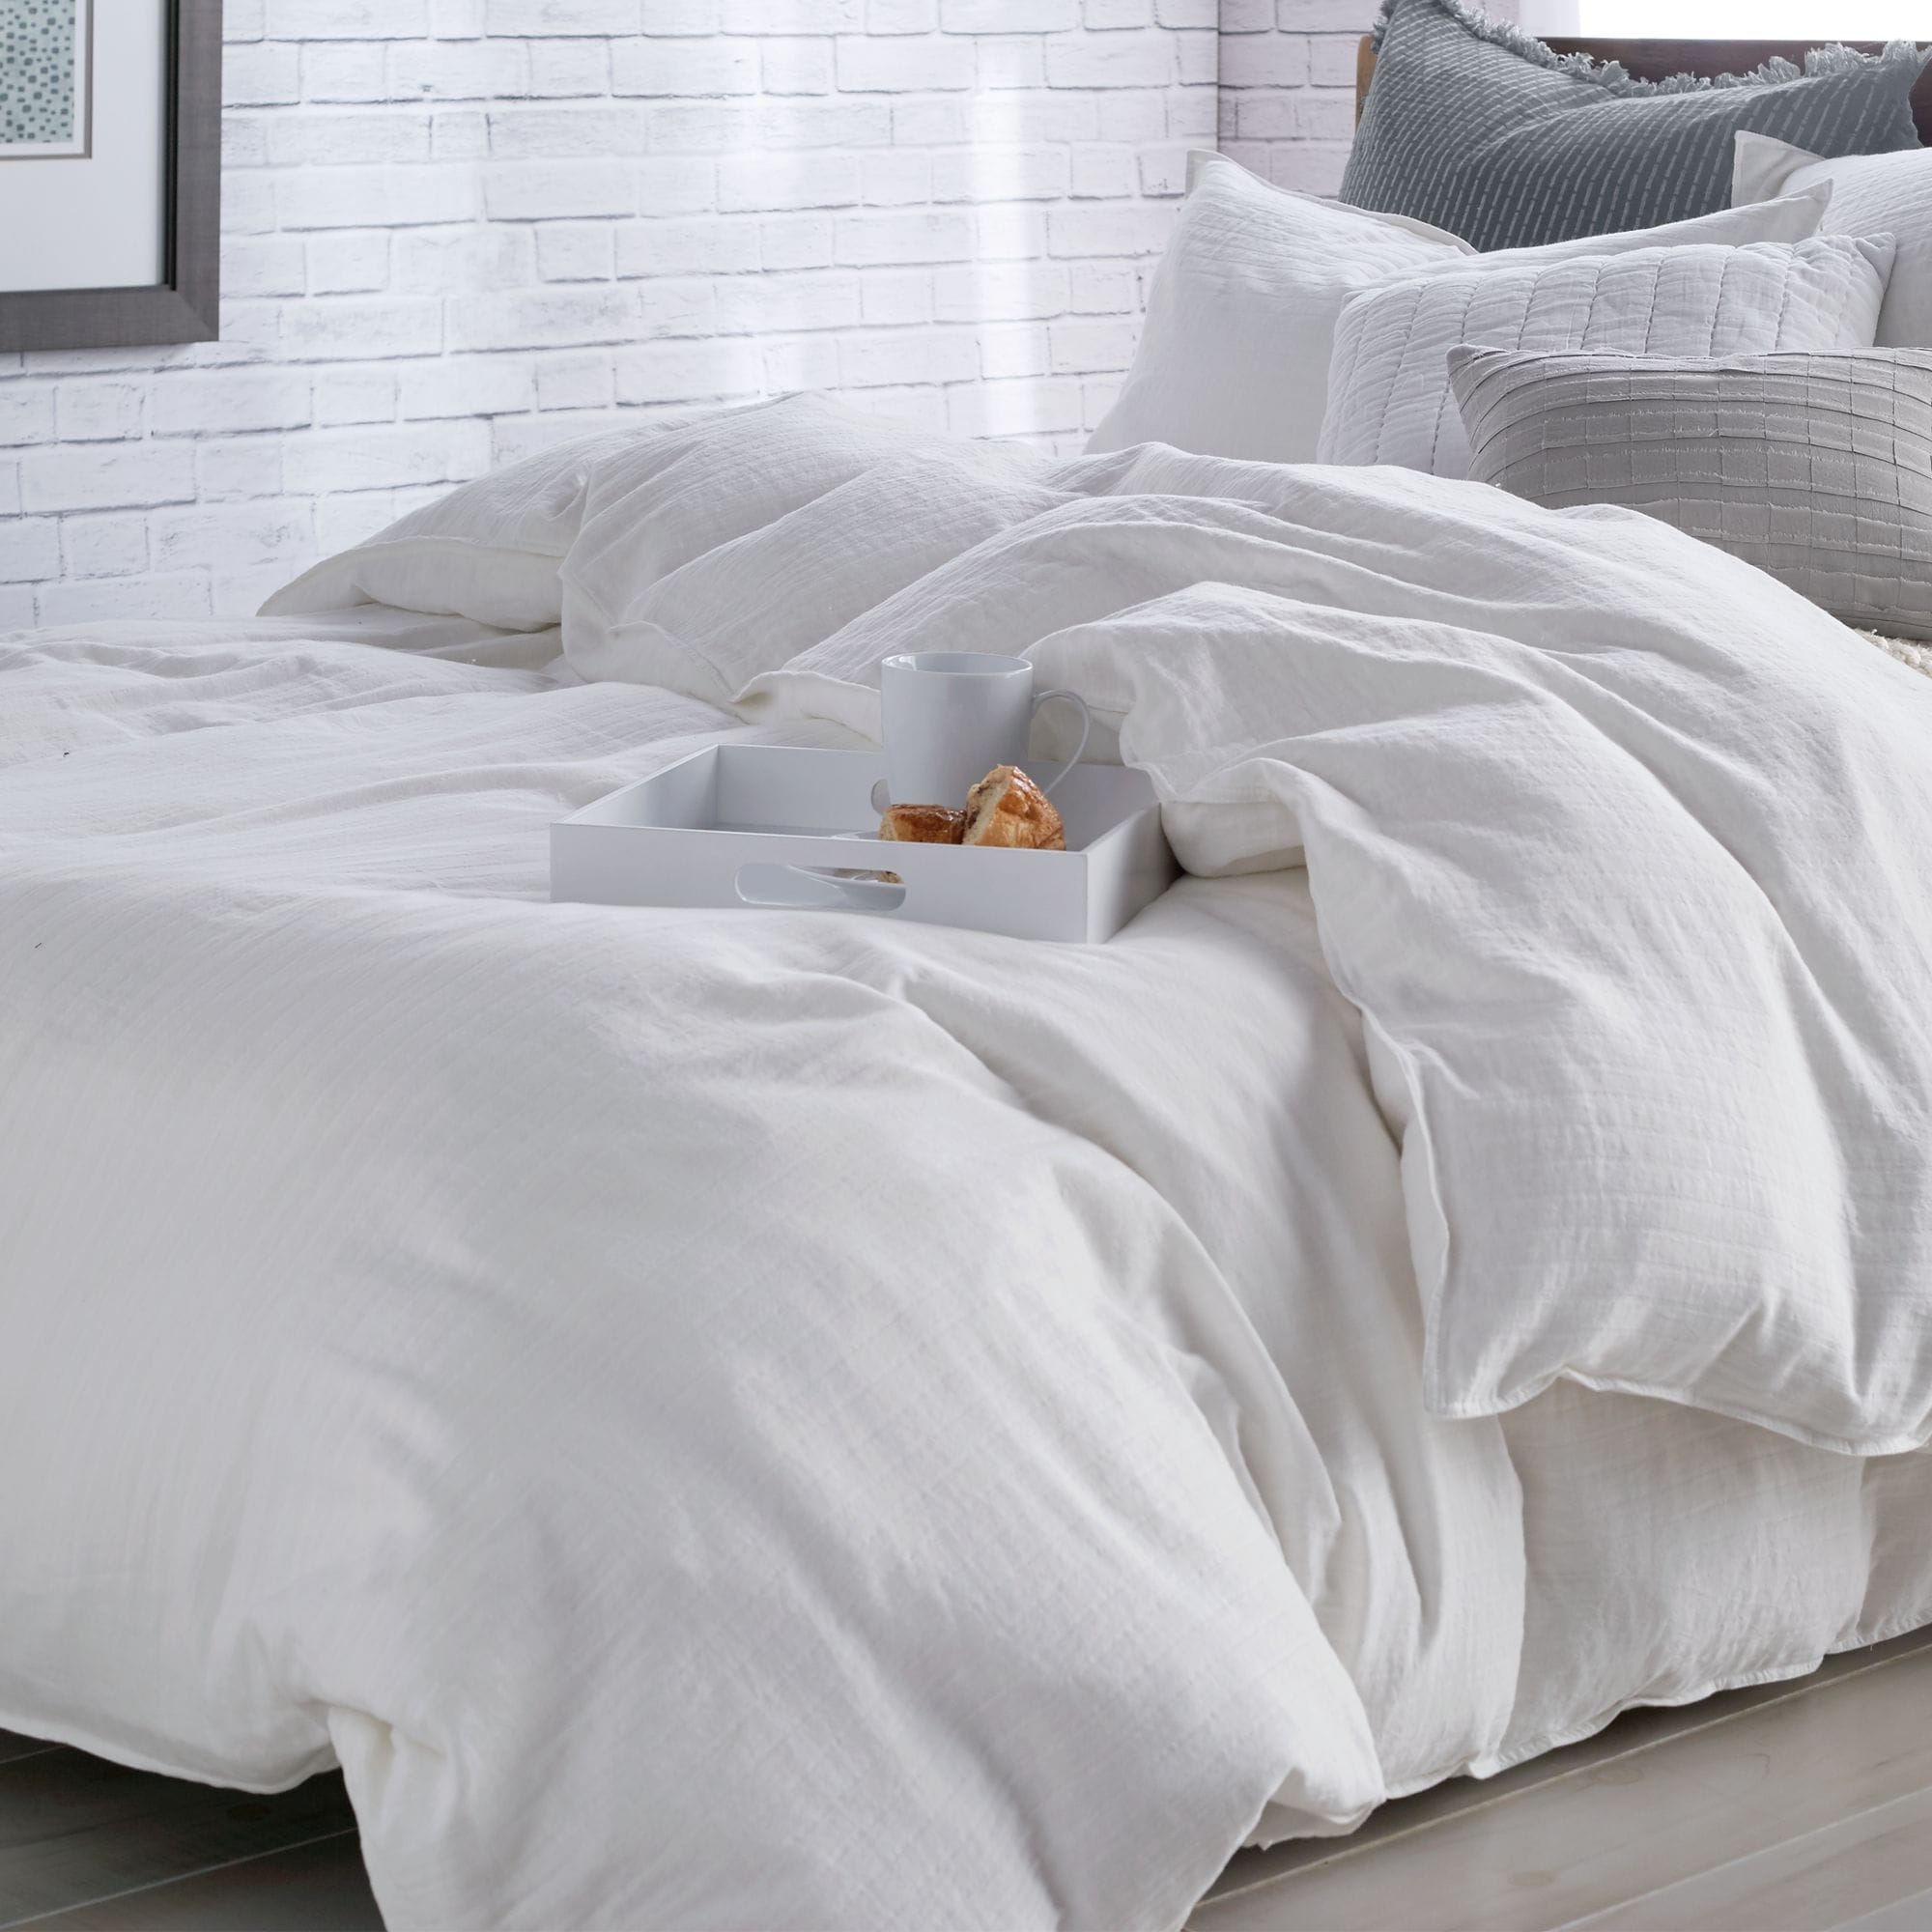 https://ak1.ostkcdn.com/images/products/is/images/direct/9eb08fd07d79a120bd92c04c881d20c7b8760b44/DKNY-PURE-Pure-Comfy-Comforter-Set.jpg